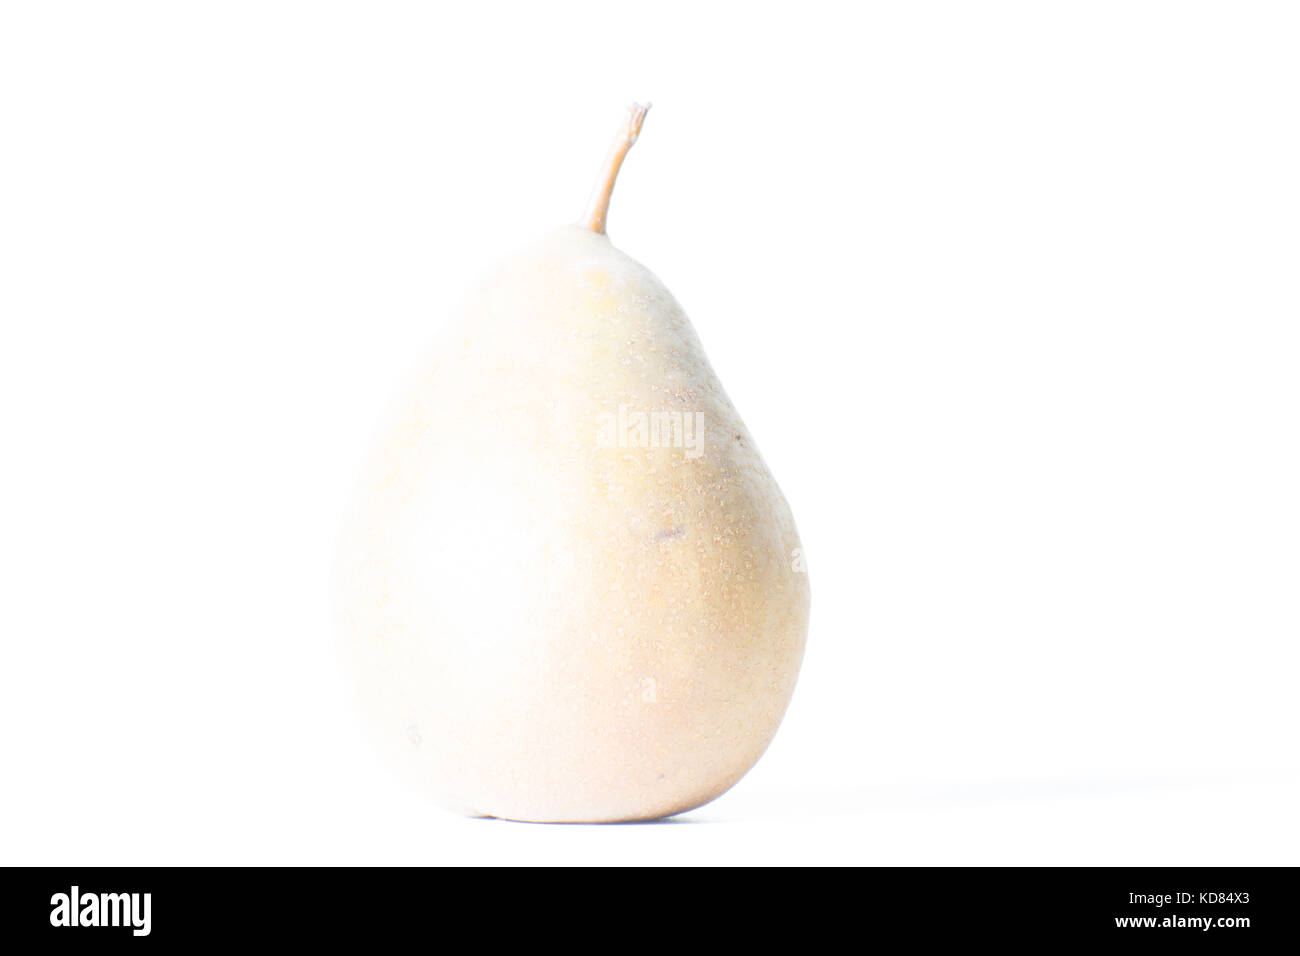 overexposed photo of a pear Stock Photo